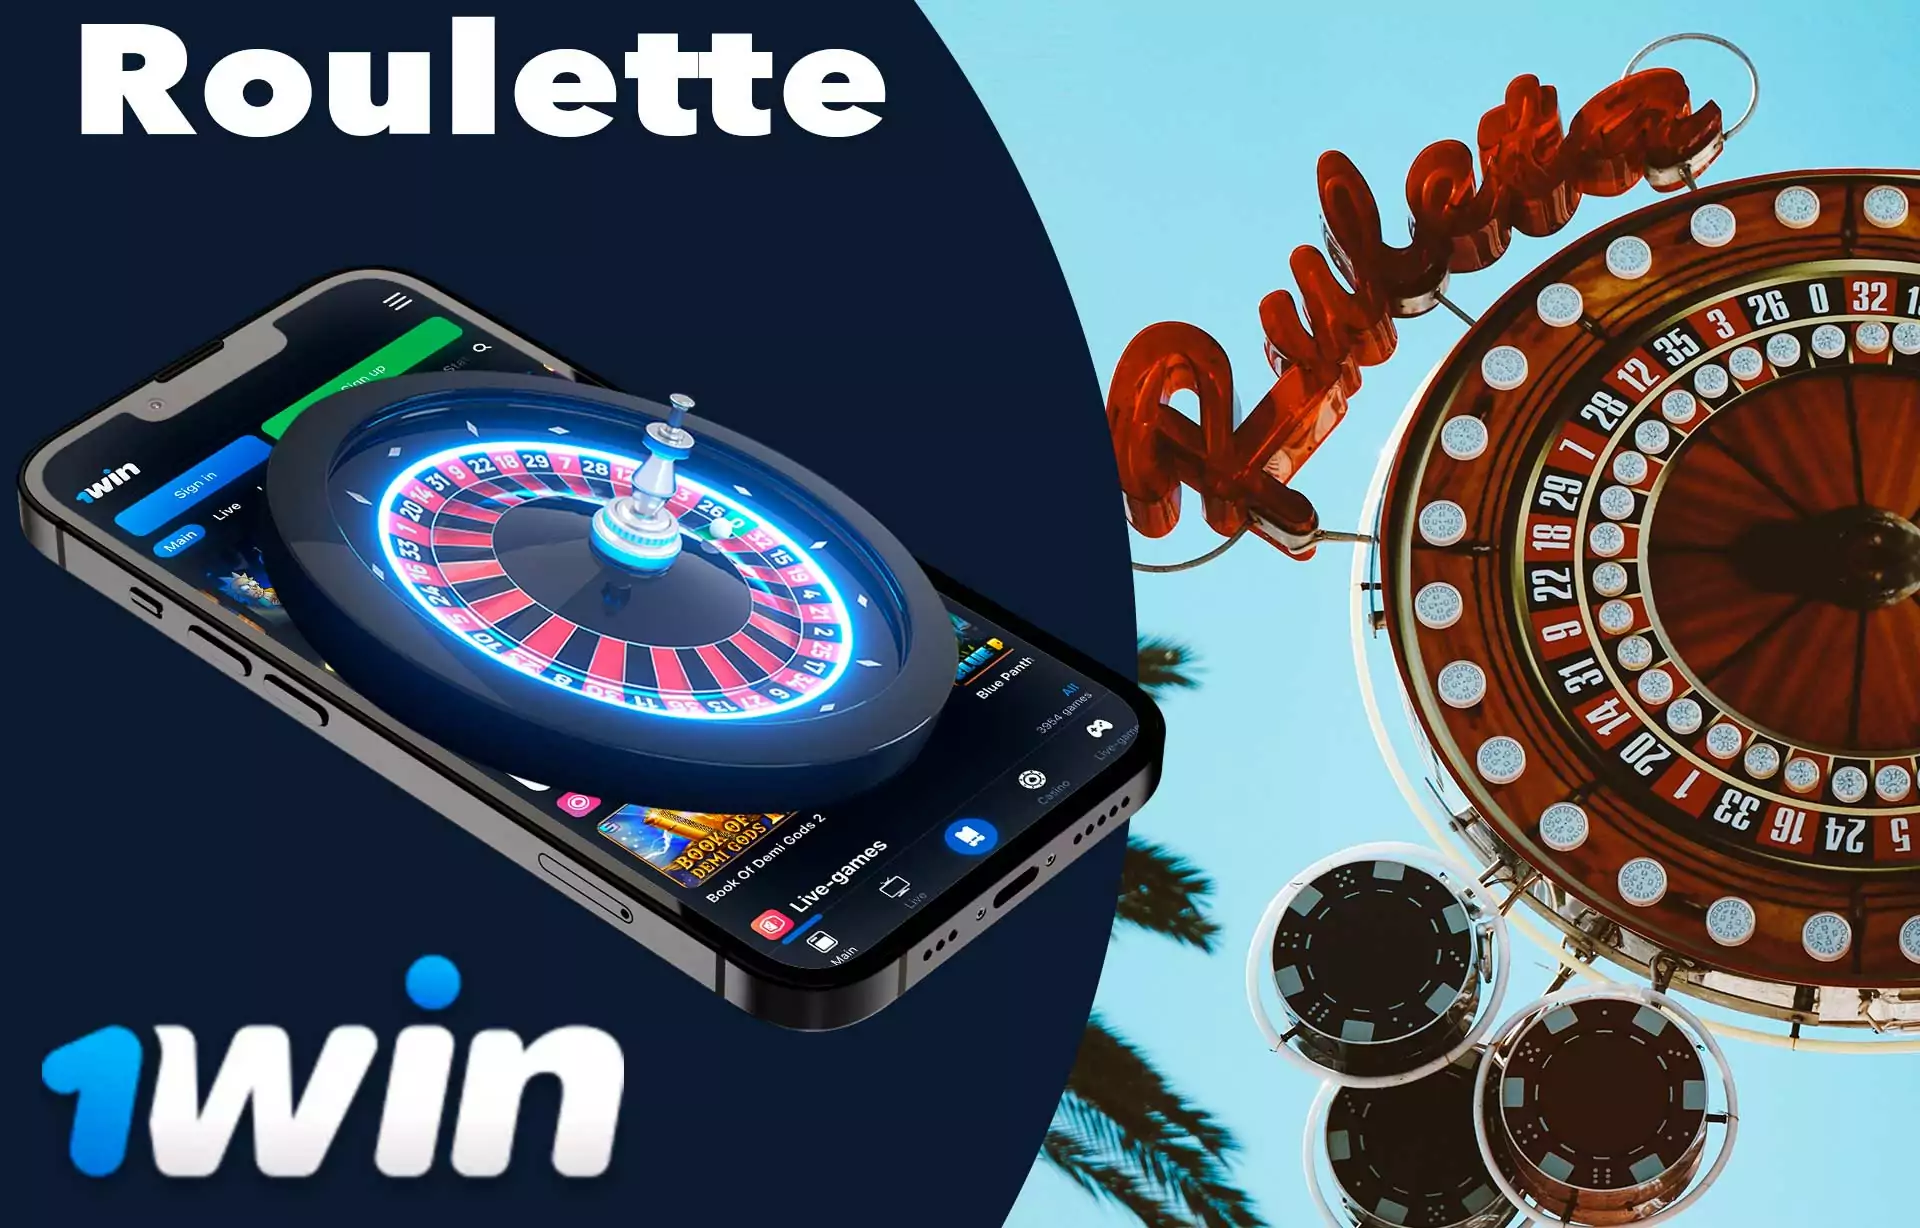 Try your luck in online roulette, place a bet on a certain number, if the ball falls into the cell that matches the early specified number, then you win.